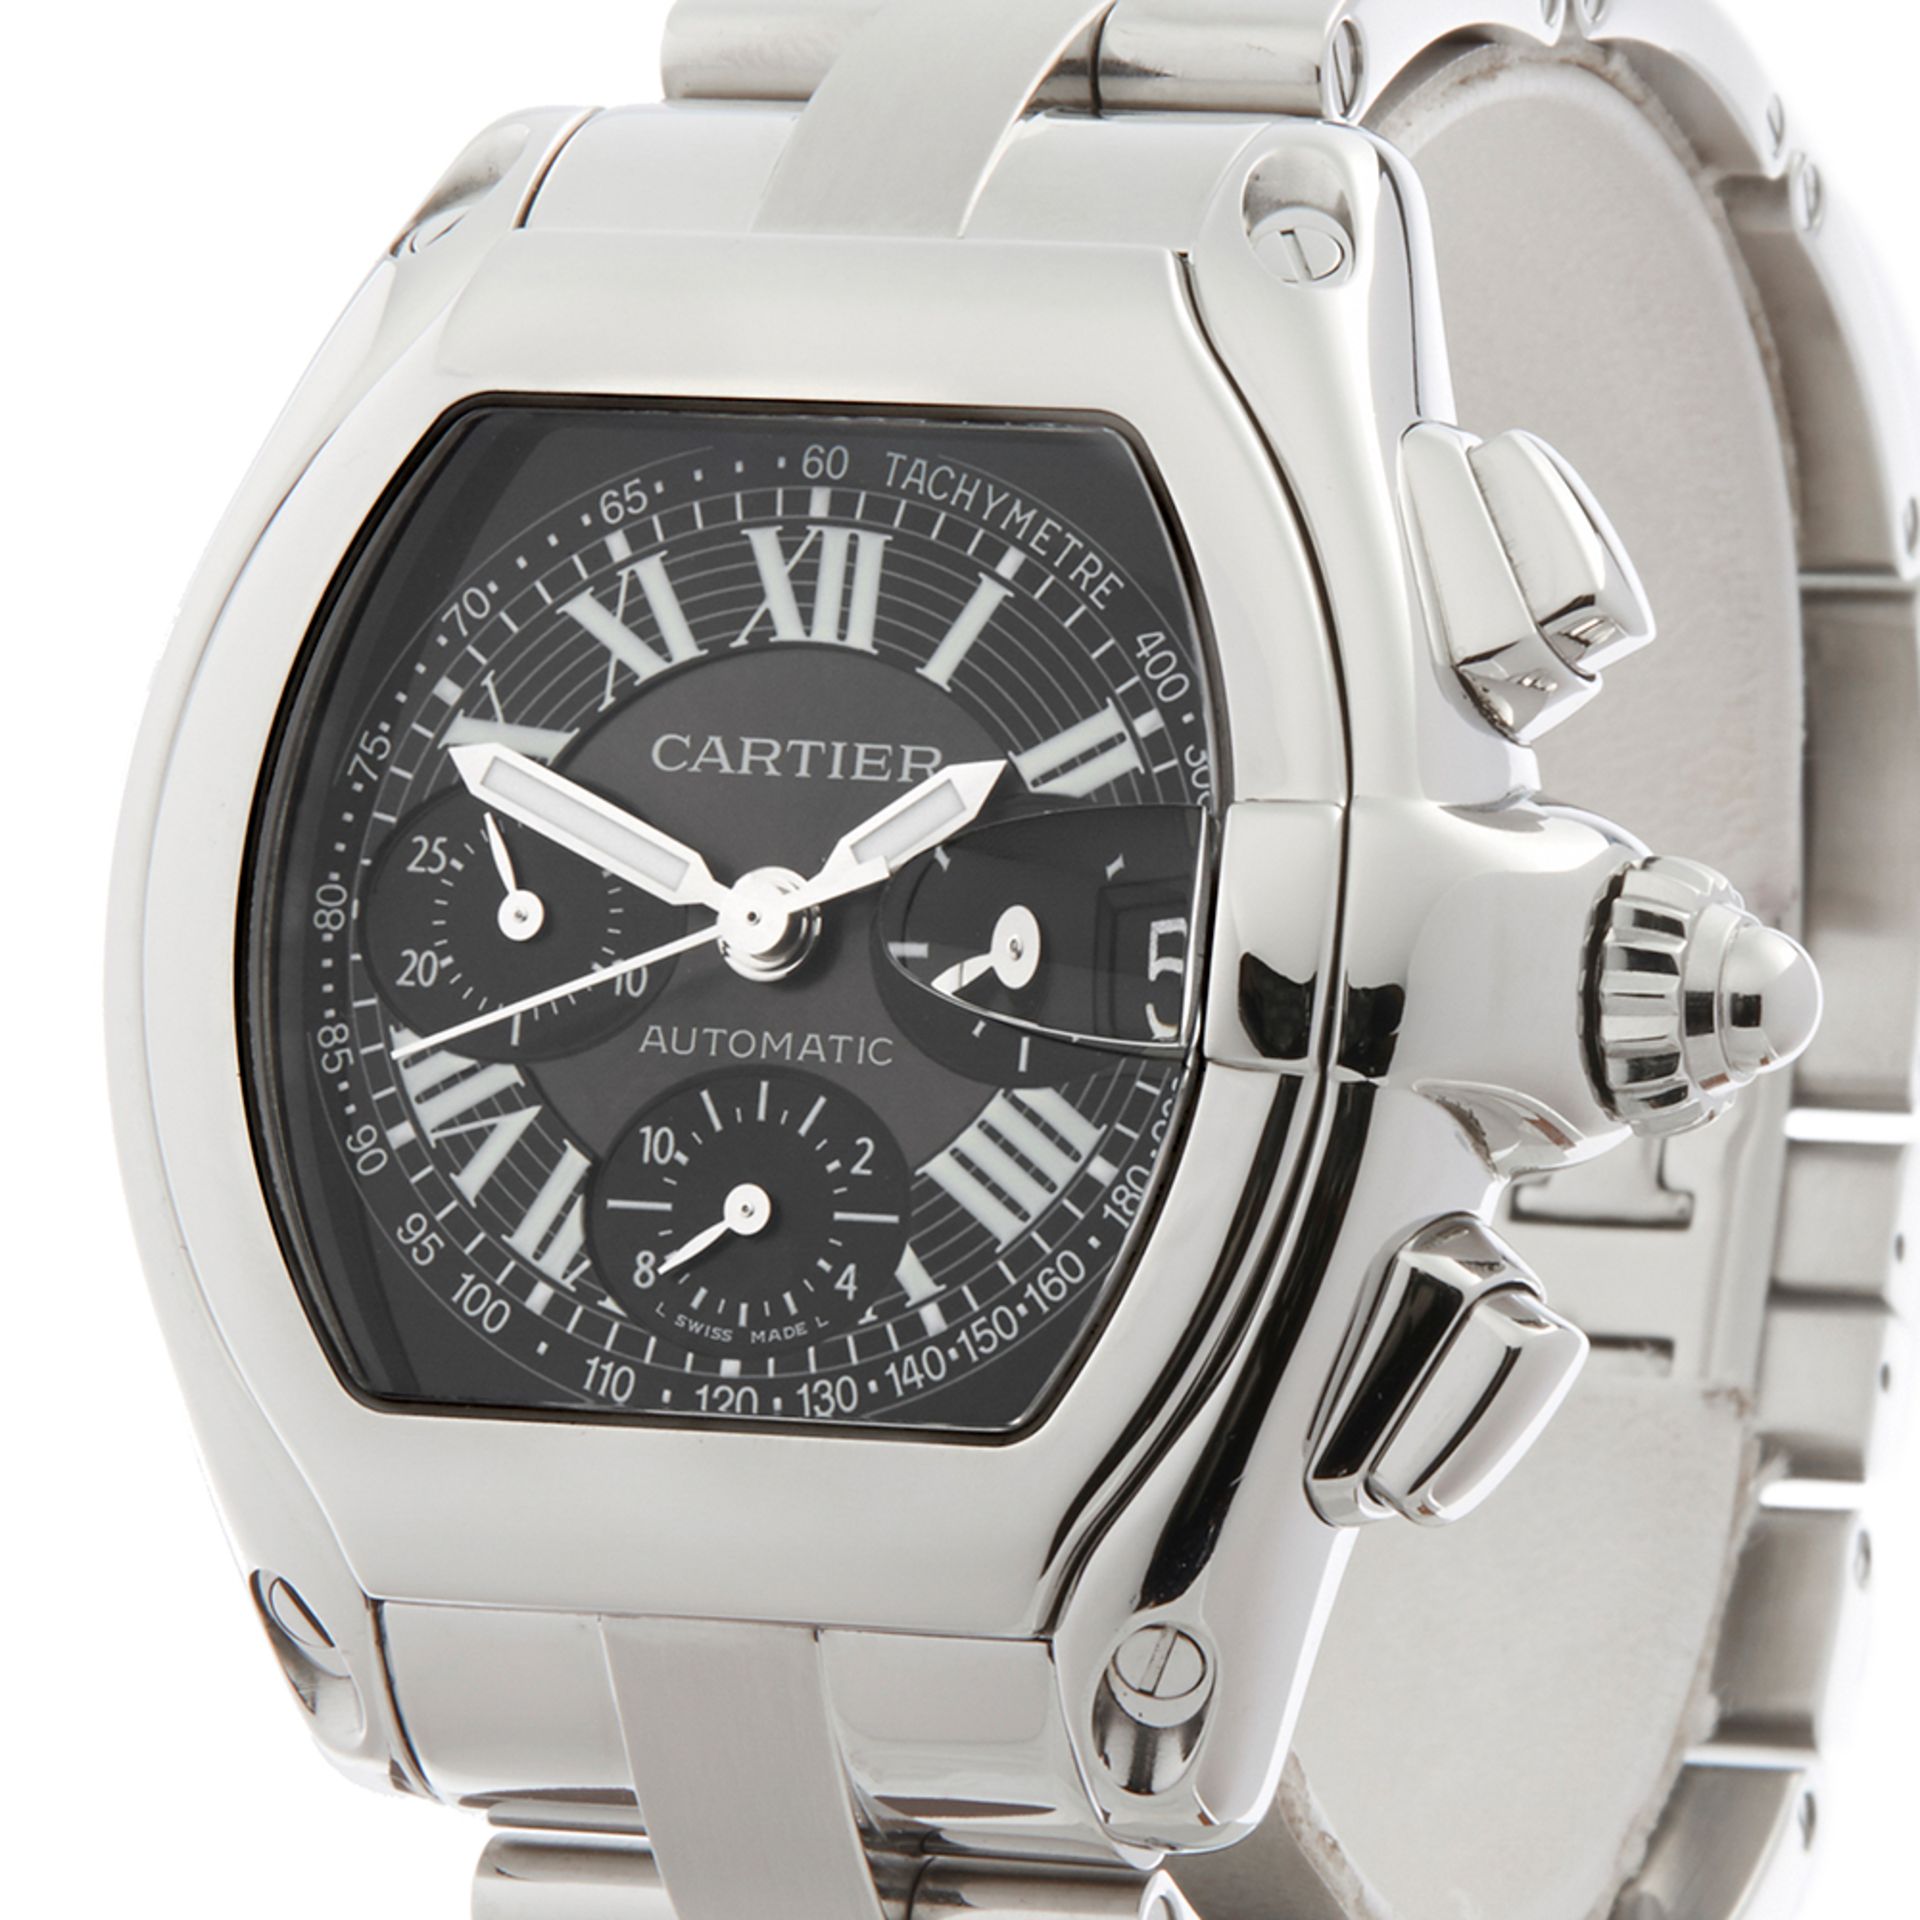 Cartier Roadster XL Chrongraph Stainless Steel - 2618 or W62019X6 - Image 3 of 7